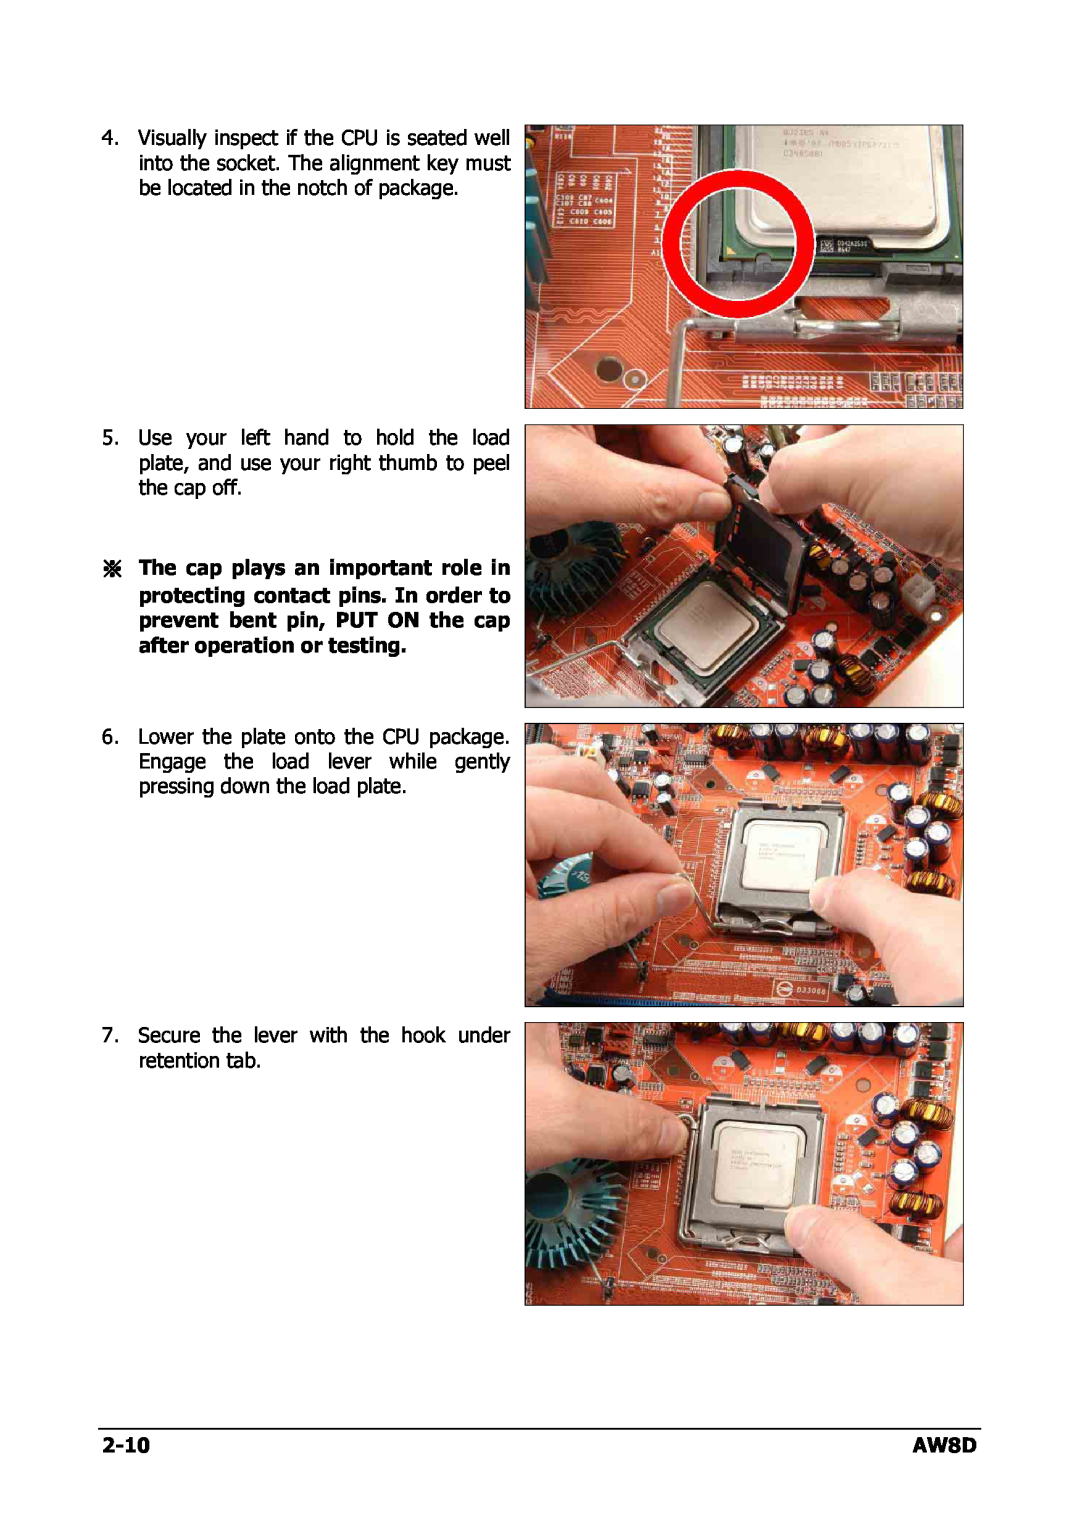 Intel AW8D user manual Secure the lever with the hook under retention tab, 2-10 